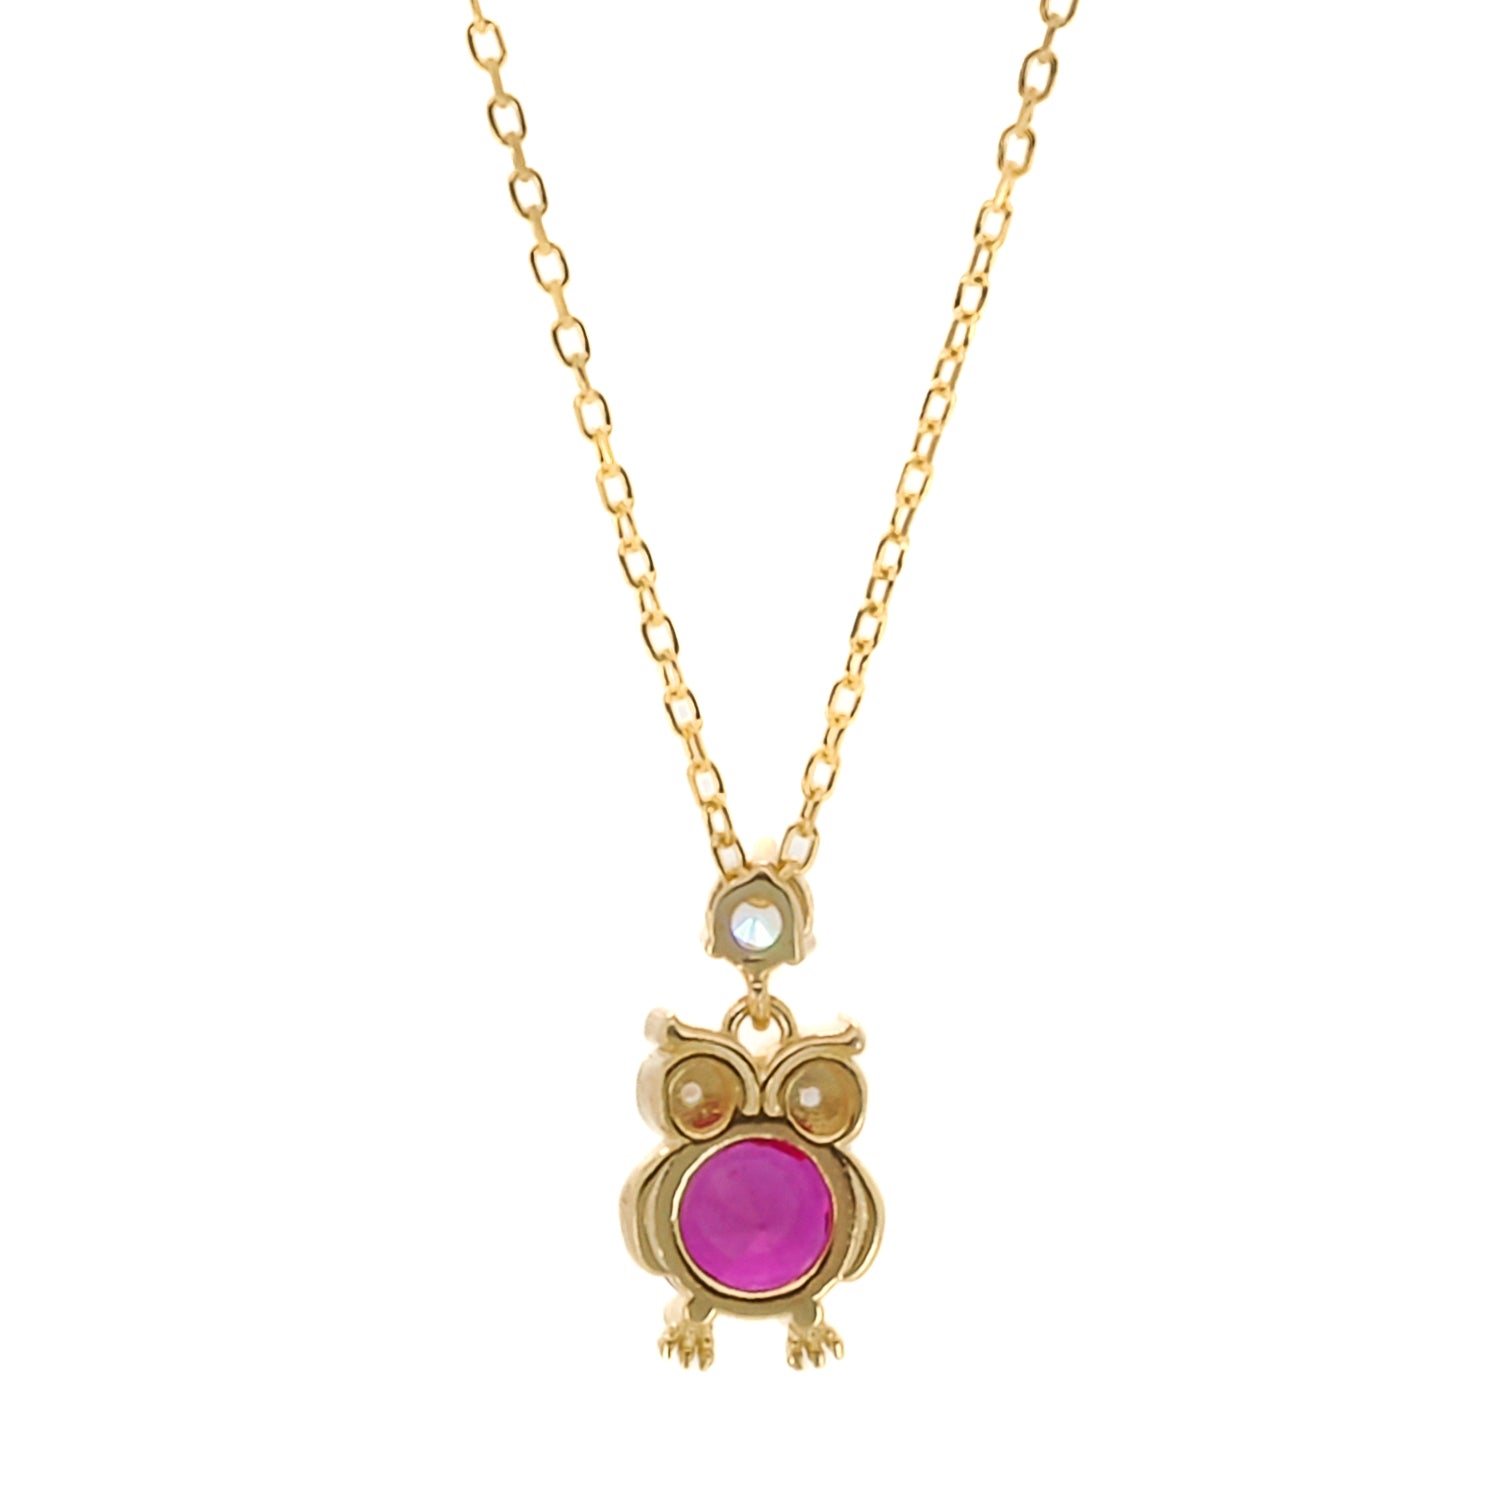 The Ruby Owl Necklace, featuring a dainty owl pendant adorned with a brilliant ruby stone and CZ diamond accents, on an 18K gold-plated sterling silver chain.